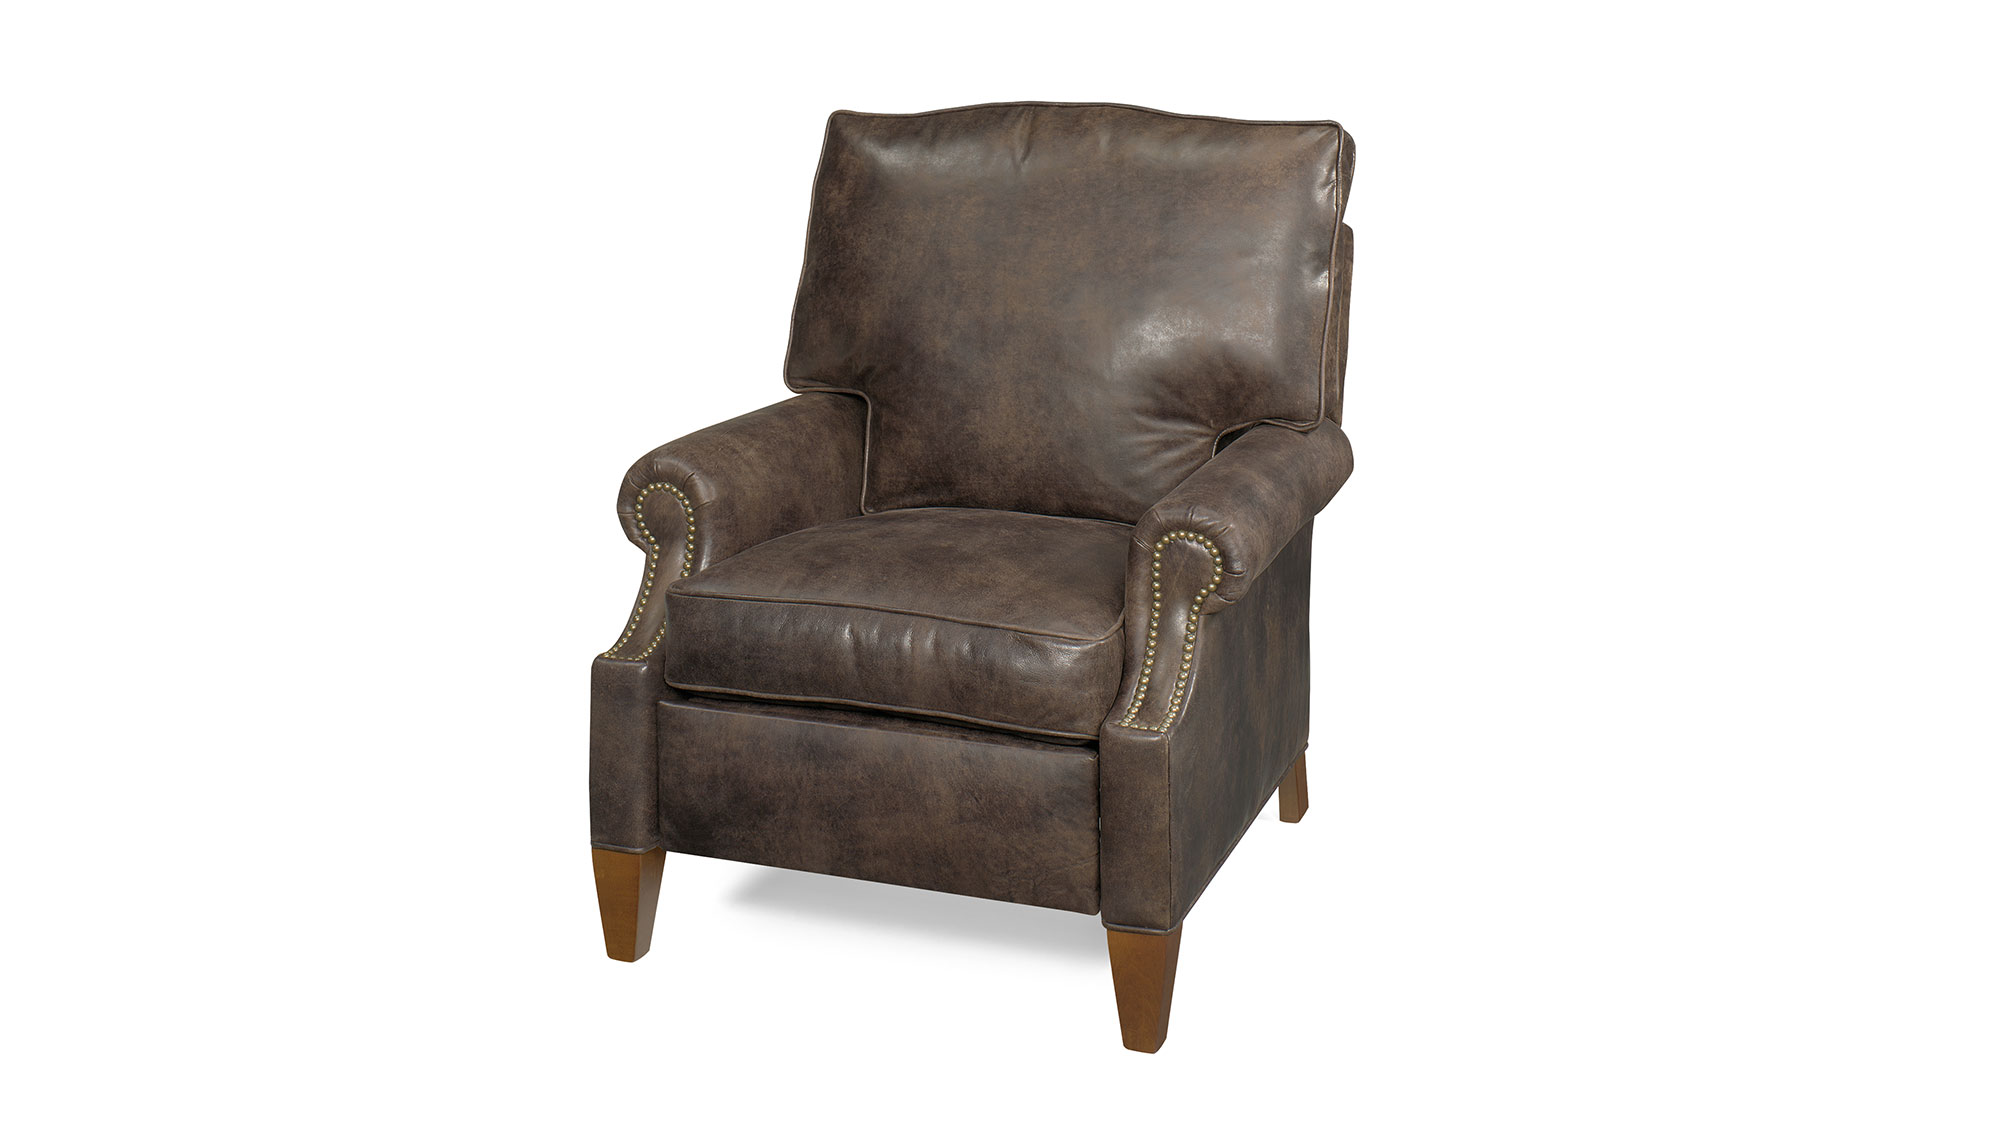 McKinley Leather chair